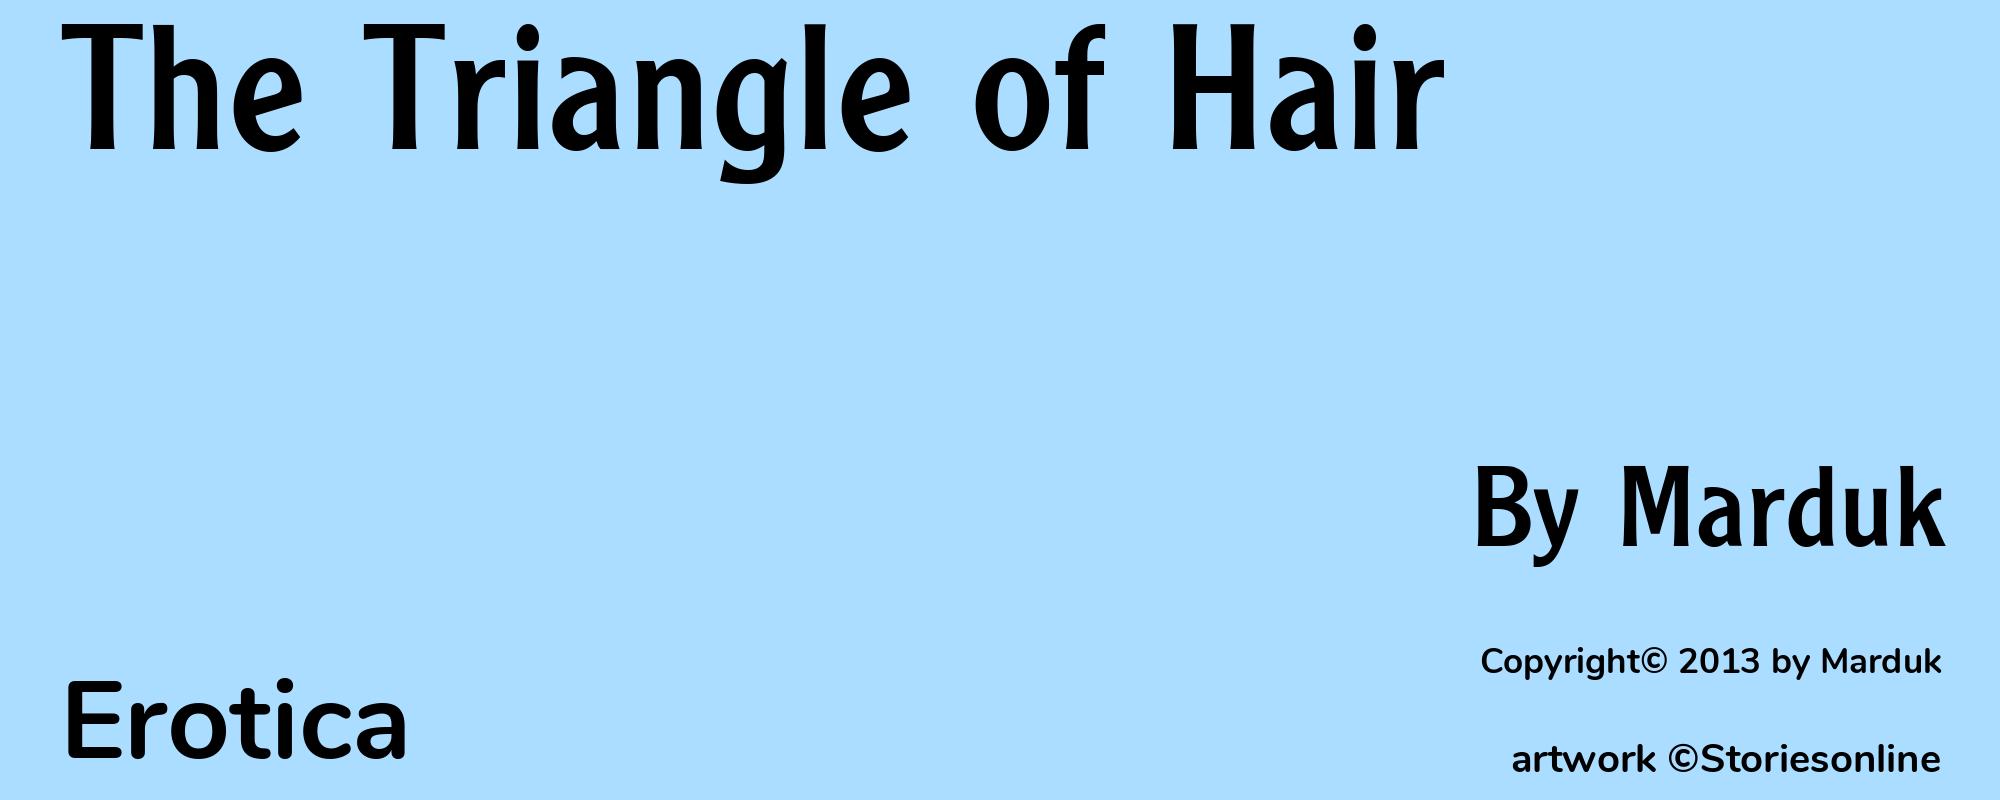 The Triangle of Hair - Cover